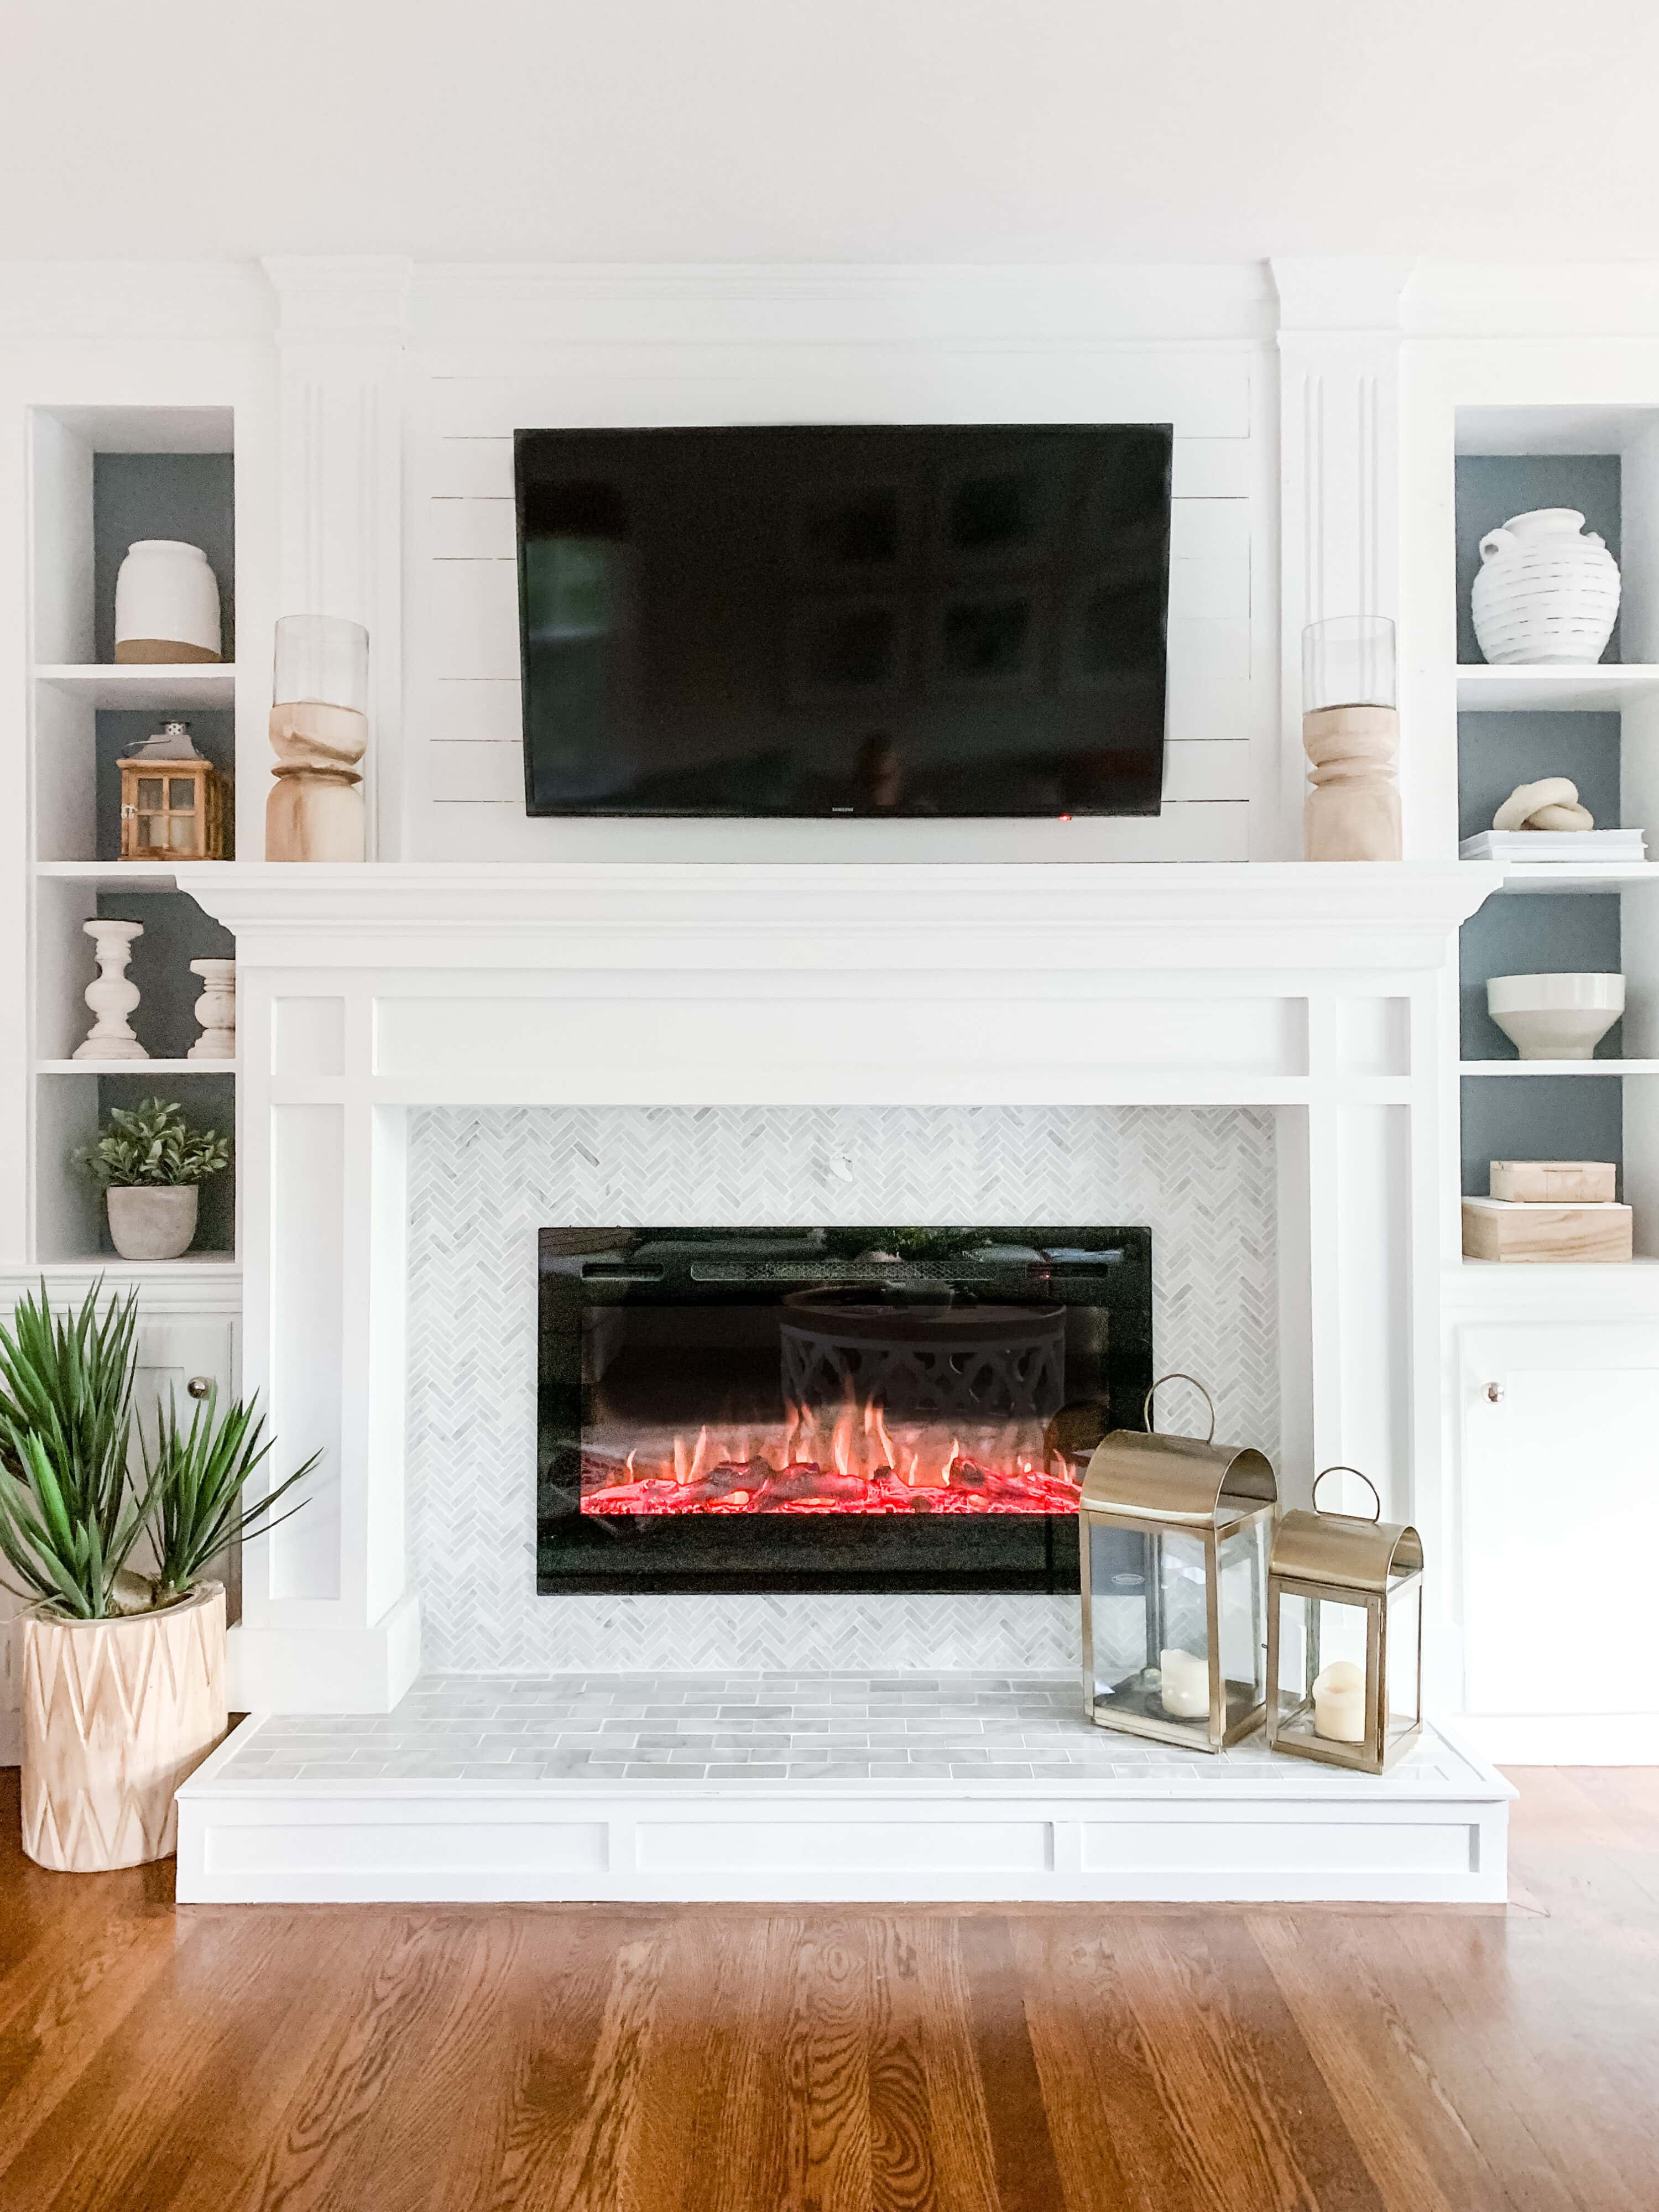 The focal point of this living room is the fireplace with TV over it